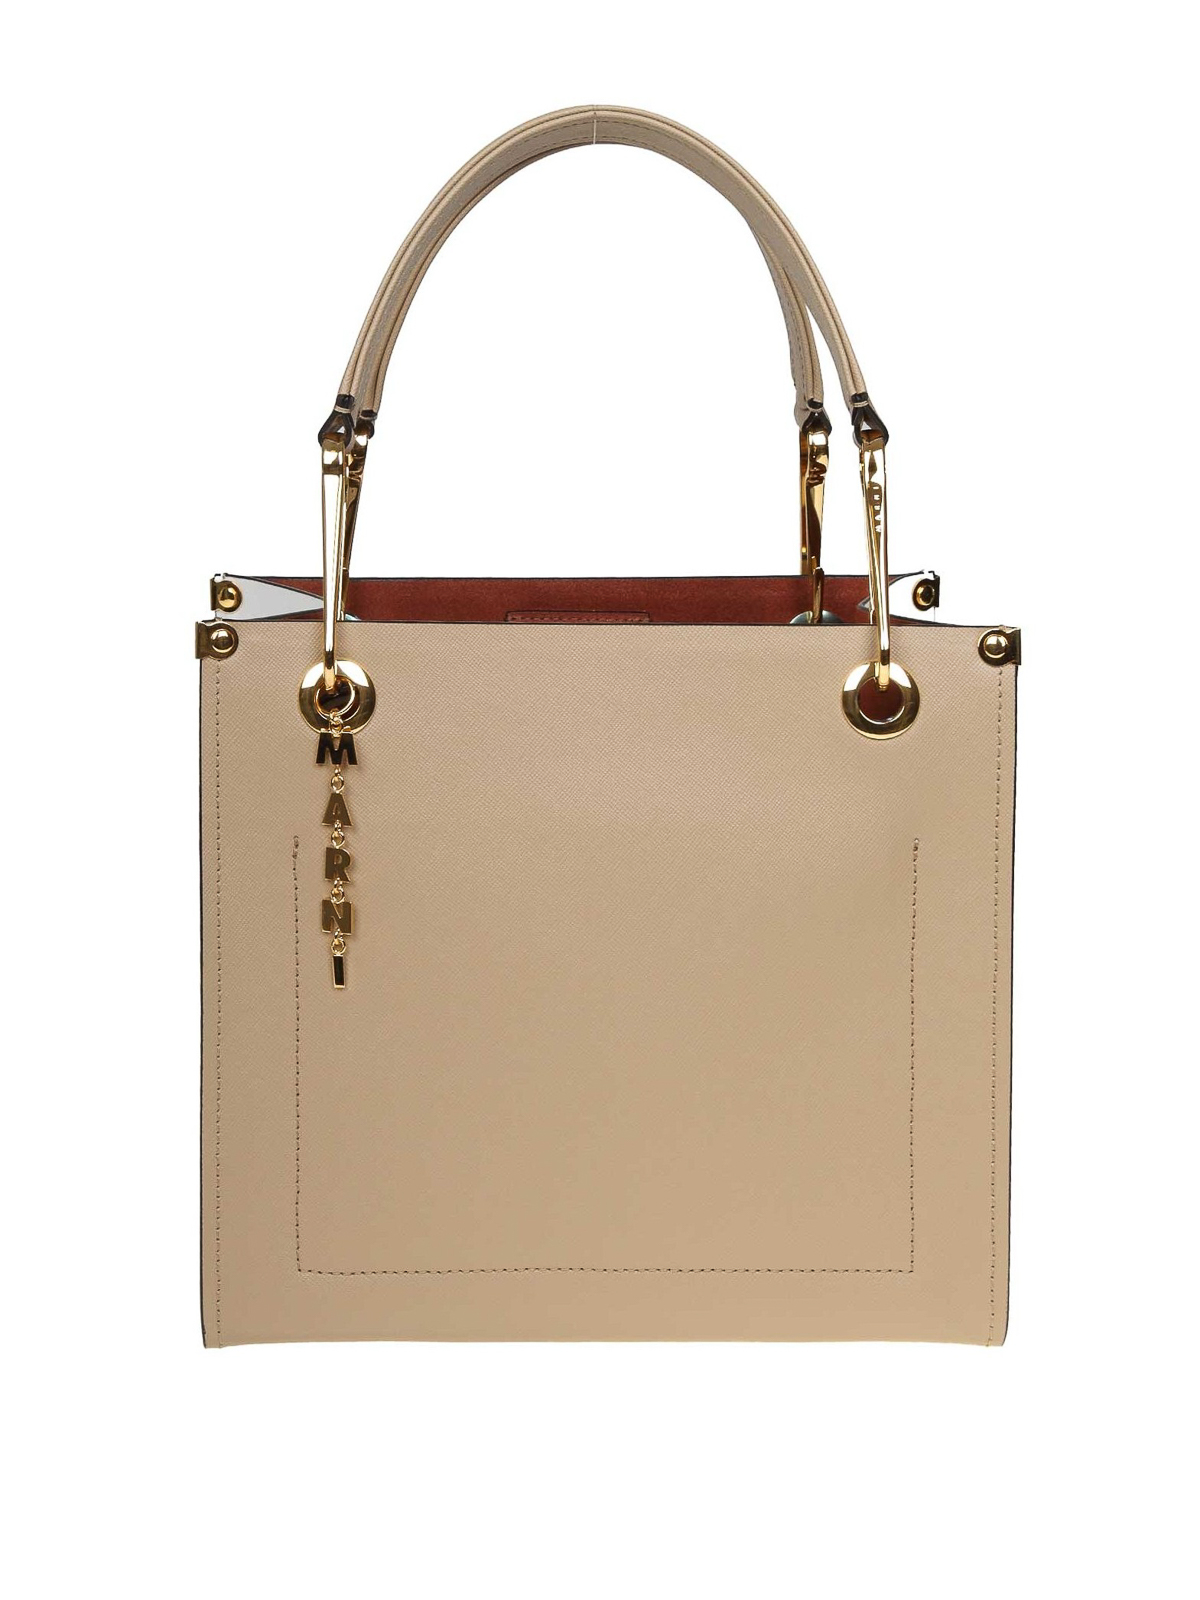 Totes bags Marni - Beige and white saffiano leather bag